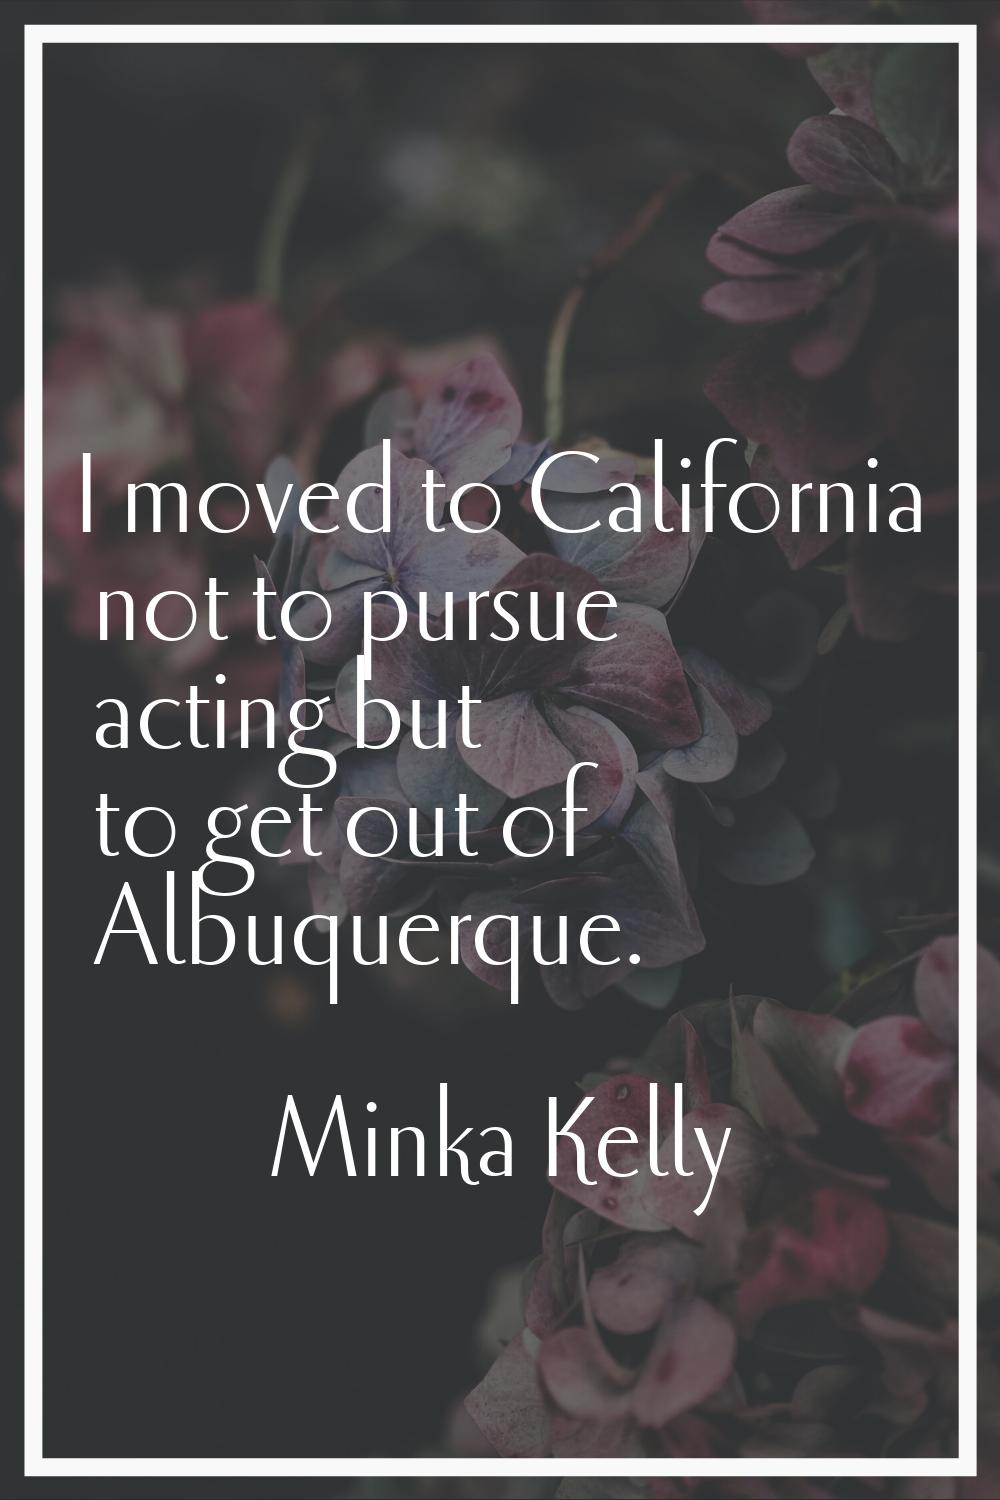 I moved to California not to pursue acting but to get out of Albuquerque.